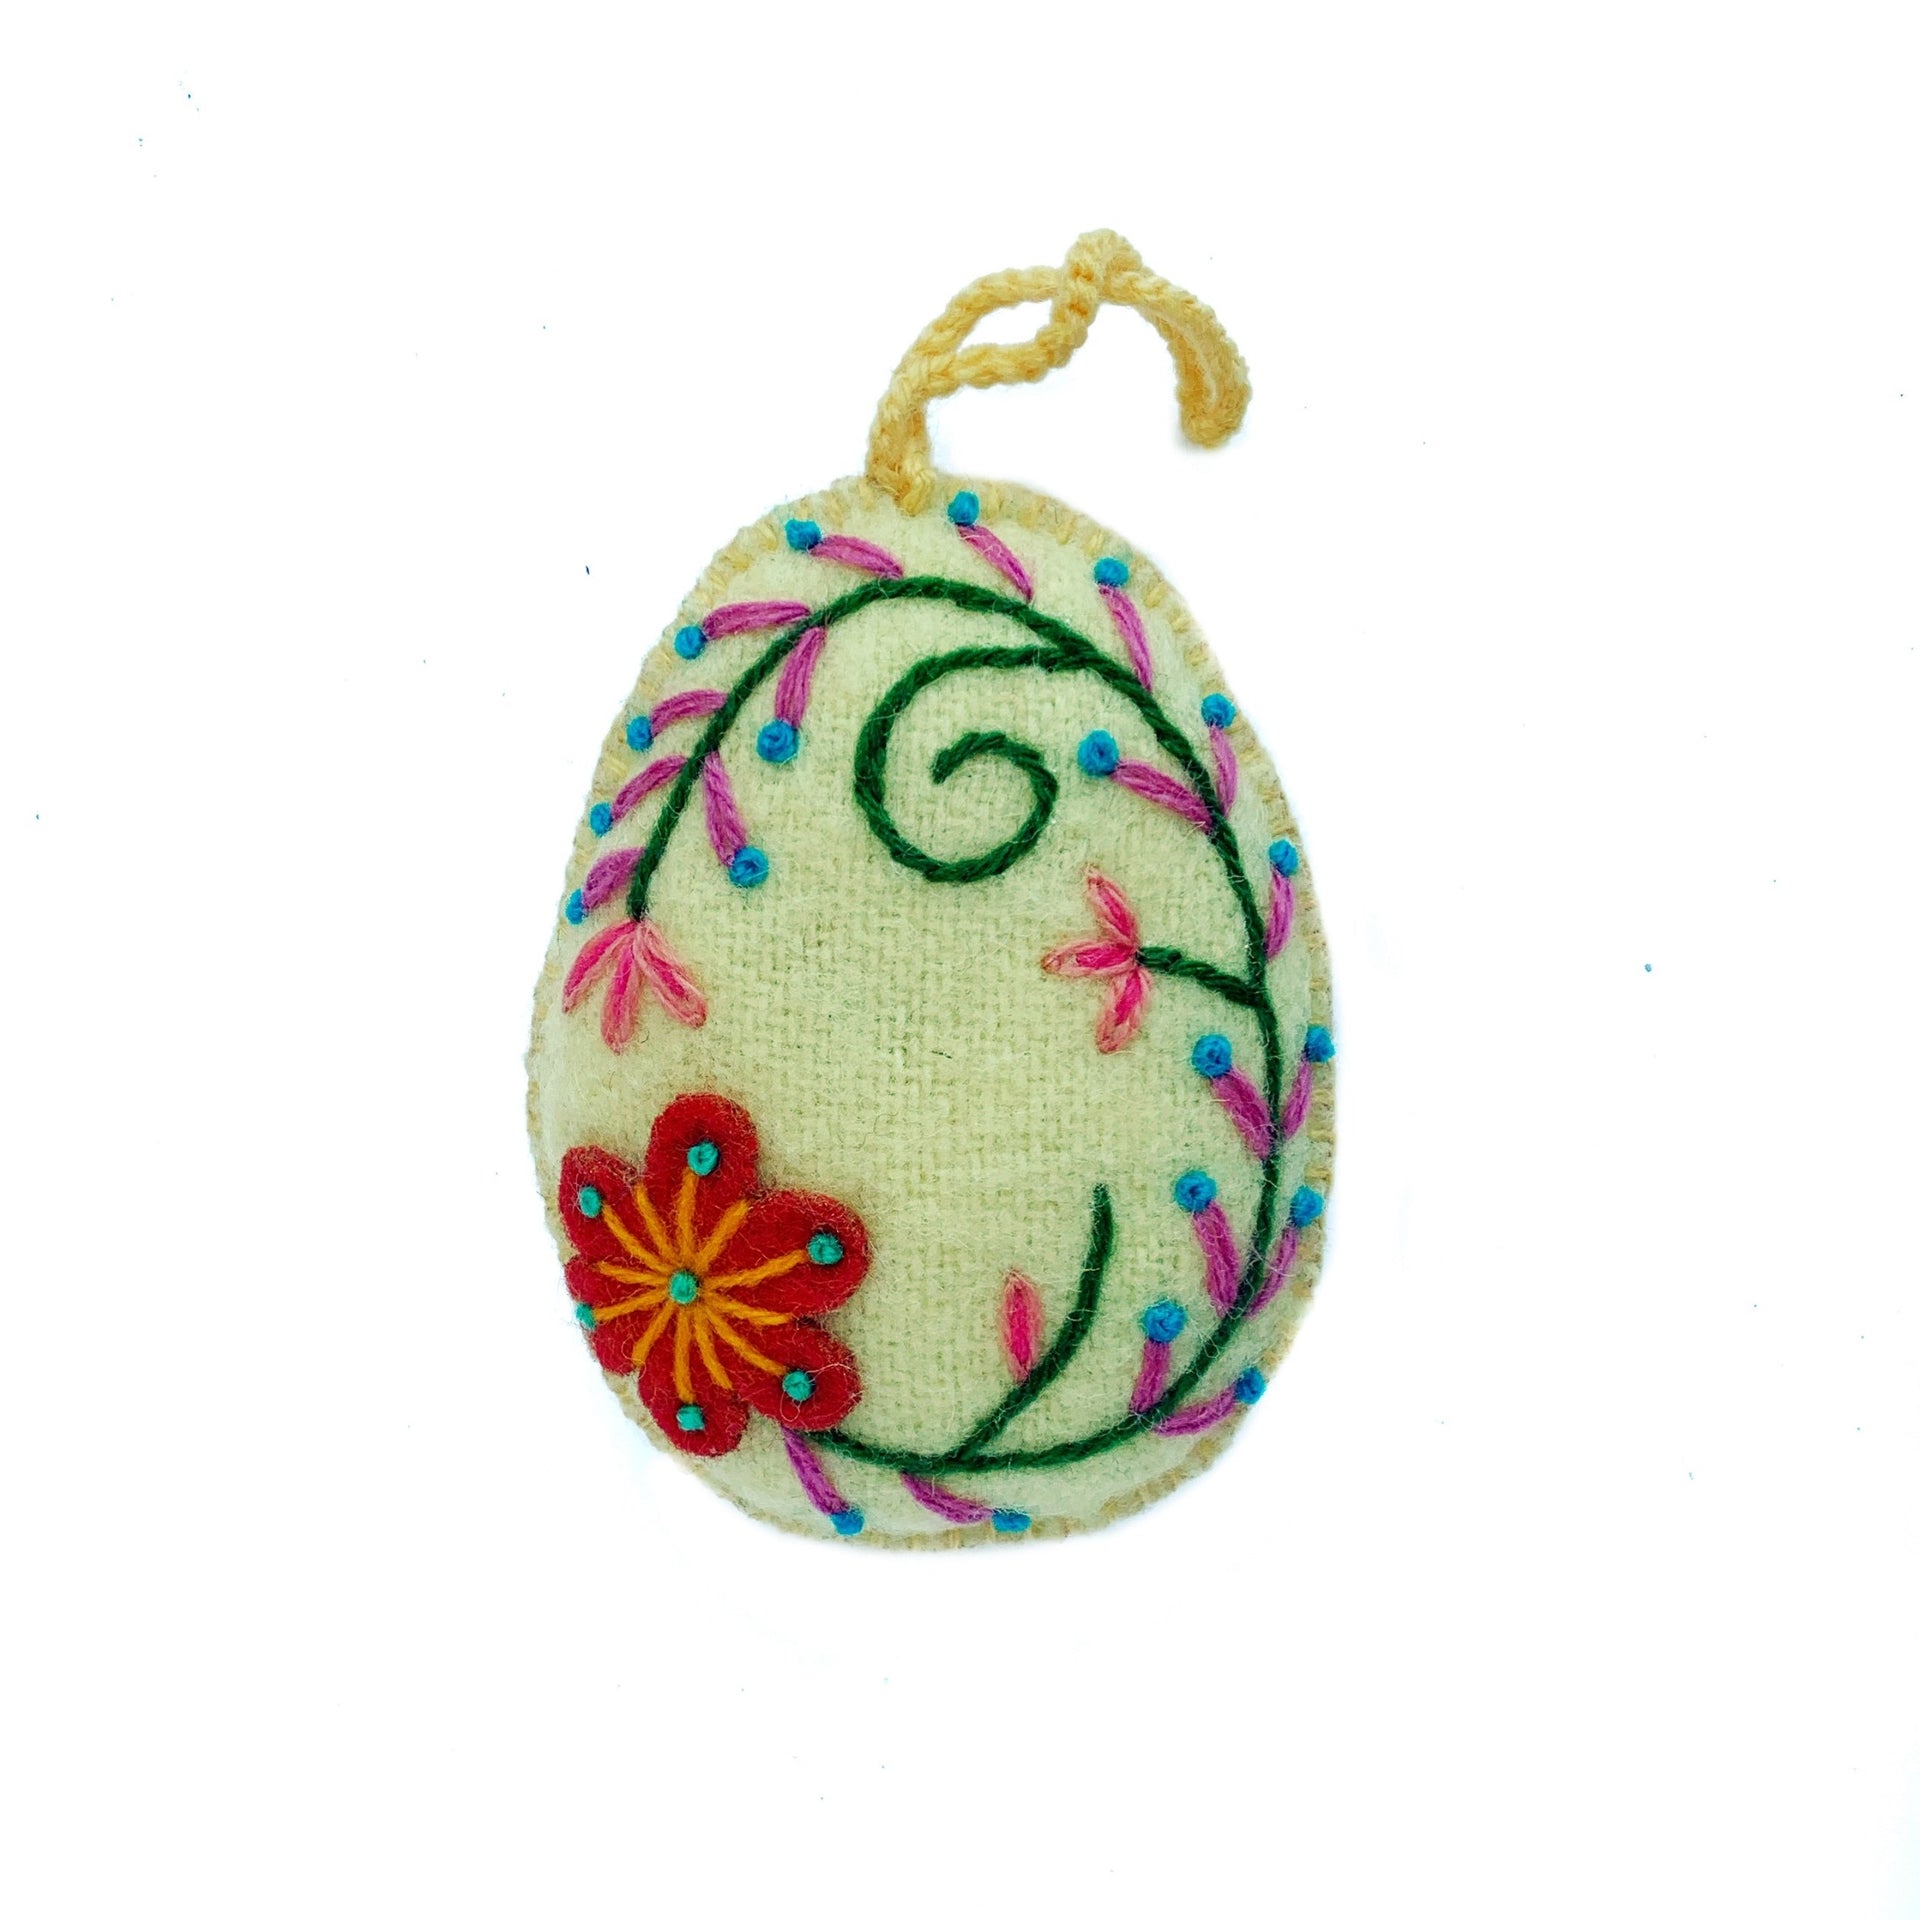 Soft yellow pastel Easter egg ornament with hand embroidered flowers and designs.